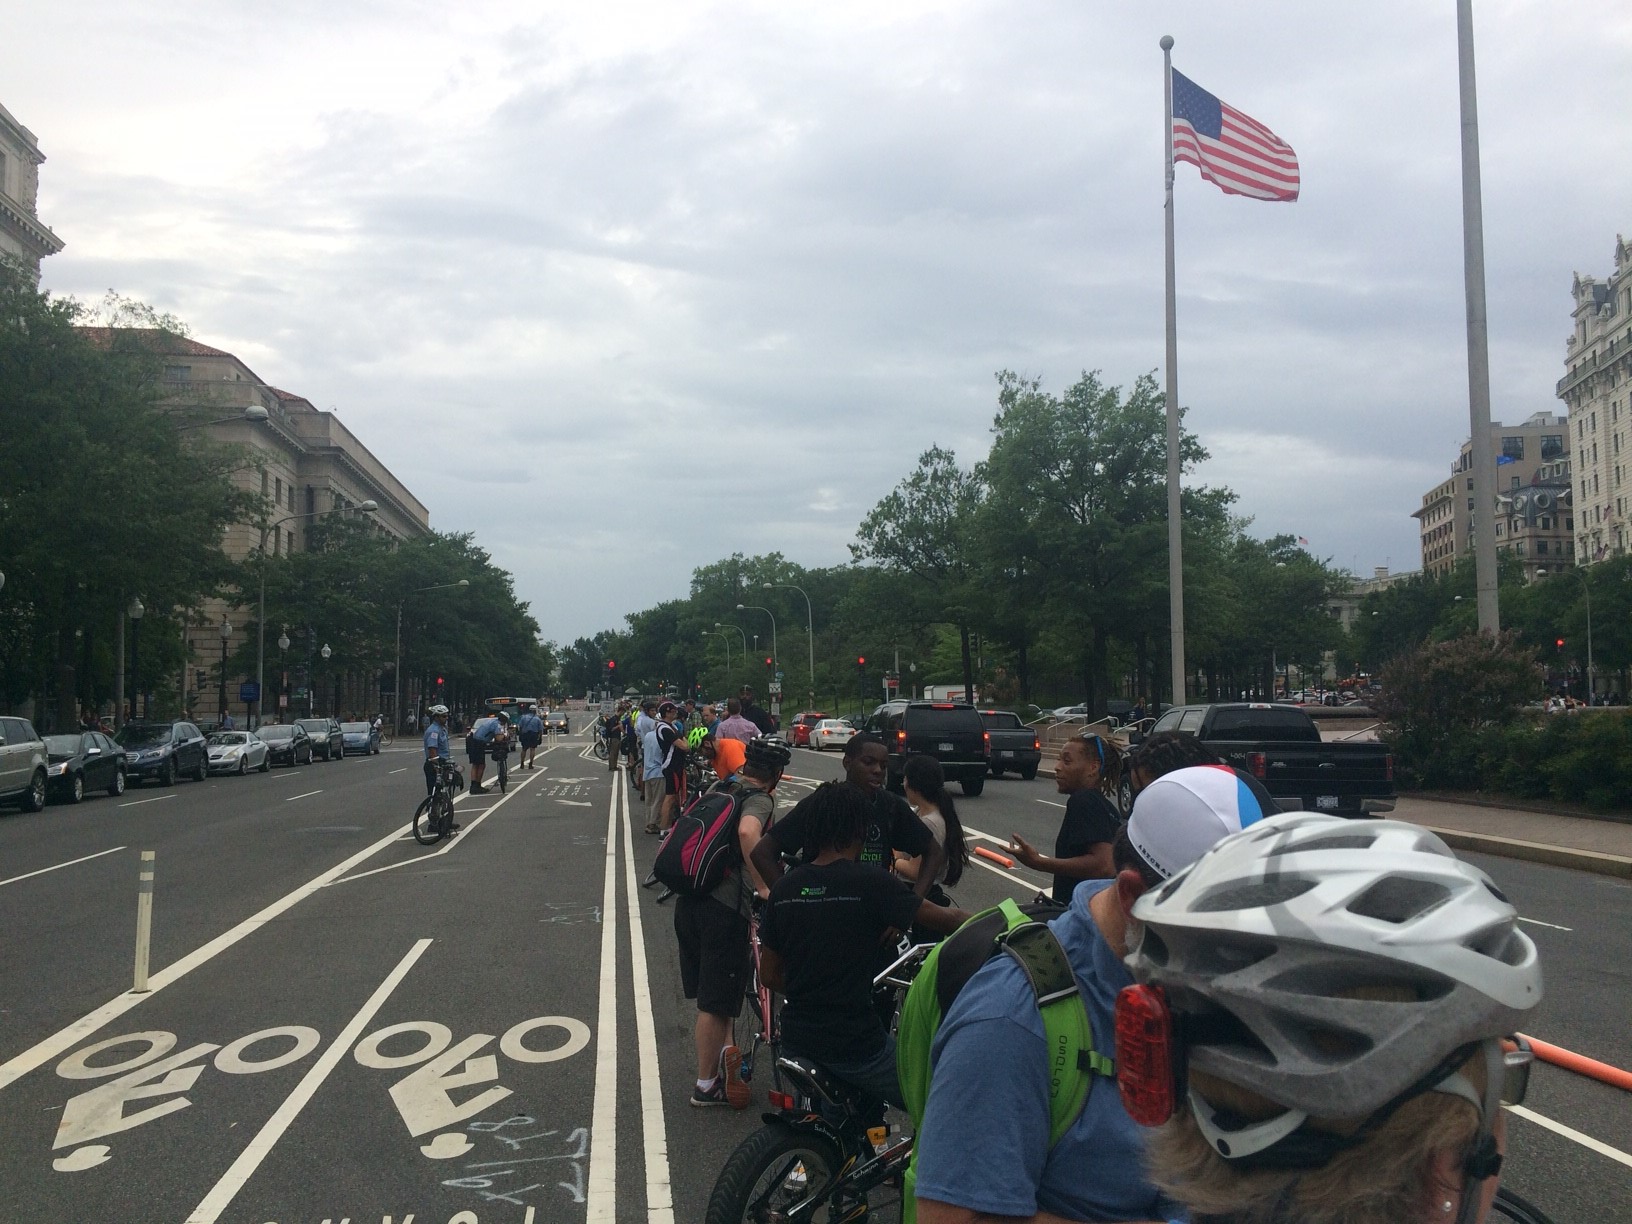 The riders want to see protective barriers known as "park-its" placed along the 1300 and 1400 blocks of Pennsylvania Avenue. (WTOP/Mike Murillo)